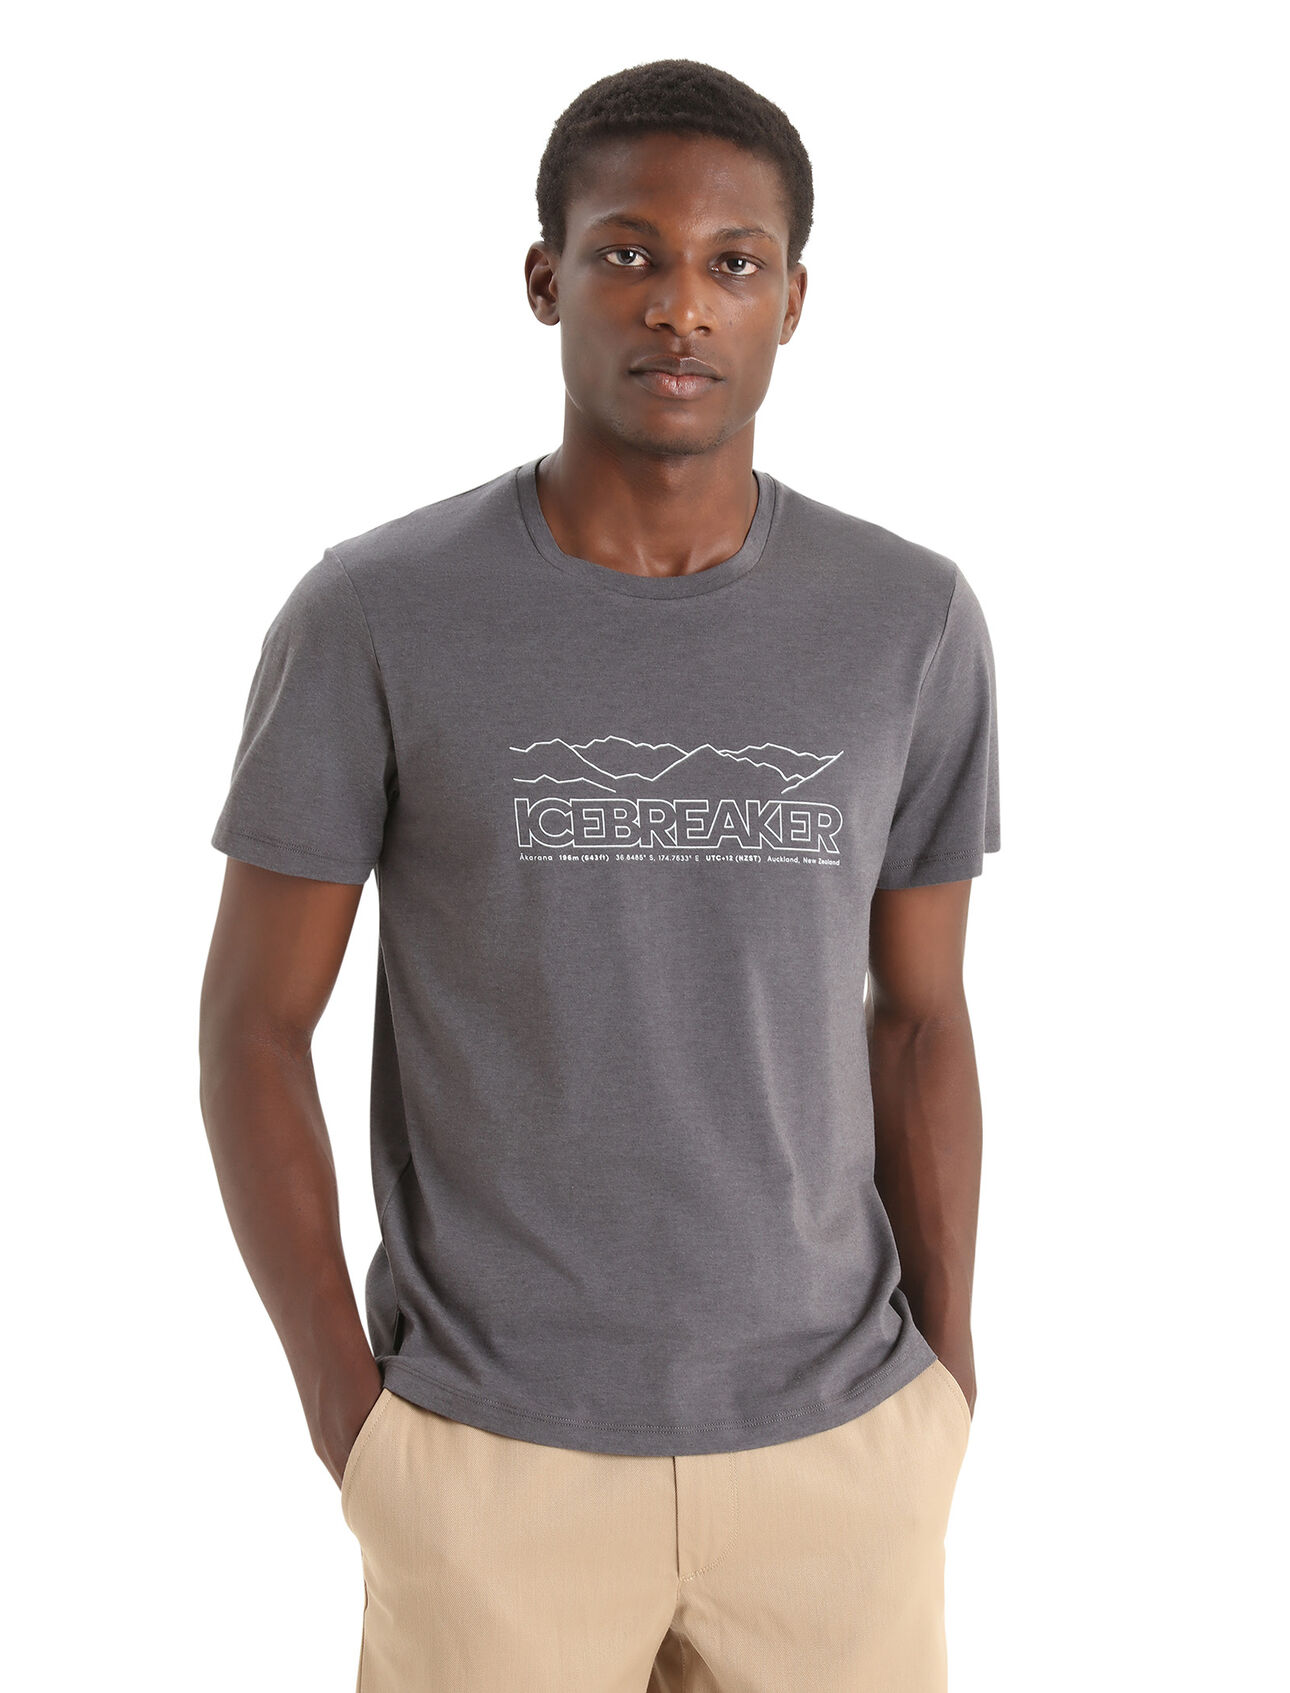 Mens Merino Blend Central T-Shirt Icebreaker Story A clean, classic and comfortable everyday tee that blends natural merino wool with organically grown cotton, the Central Classic Short Sleeve Tee Icebreaker Story has you covered any day of the week.